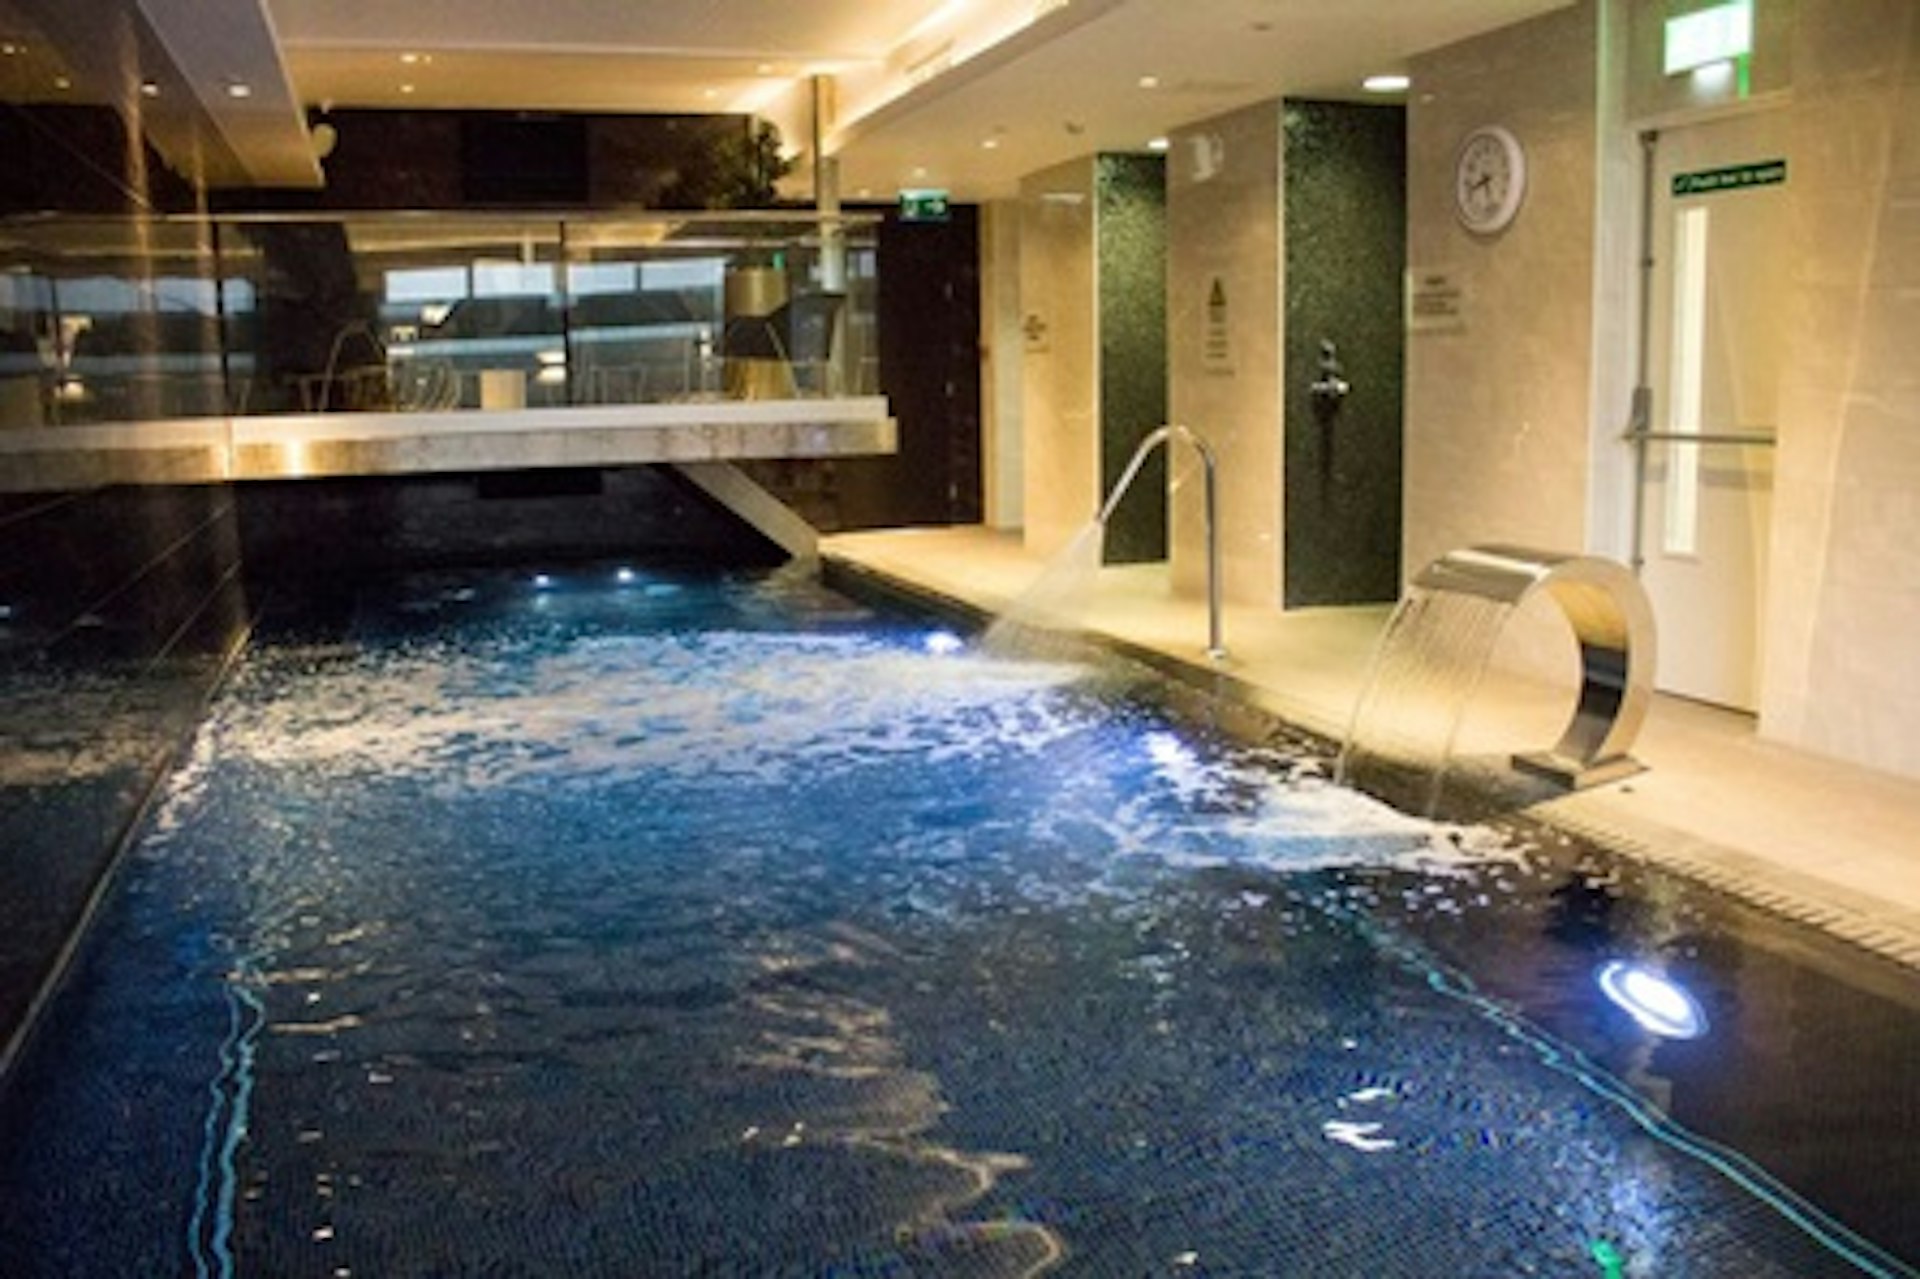 Sunday Night Spa Break with Dinner and Treatment for Two at DoubleTree by Hilton Hotel & Spa Liverpool 1